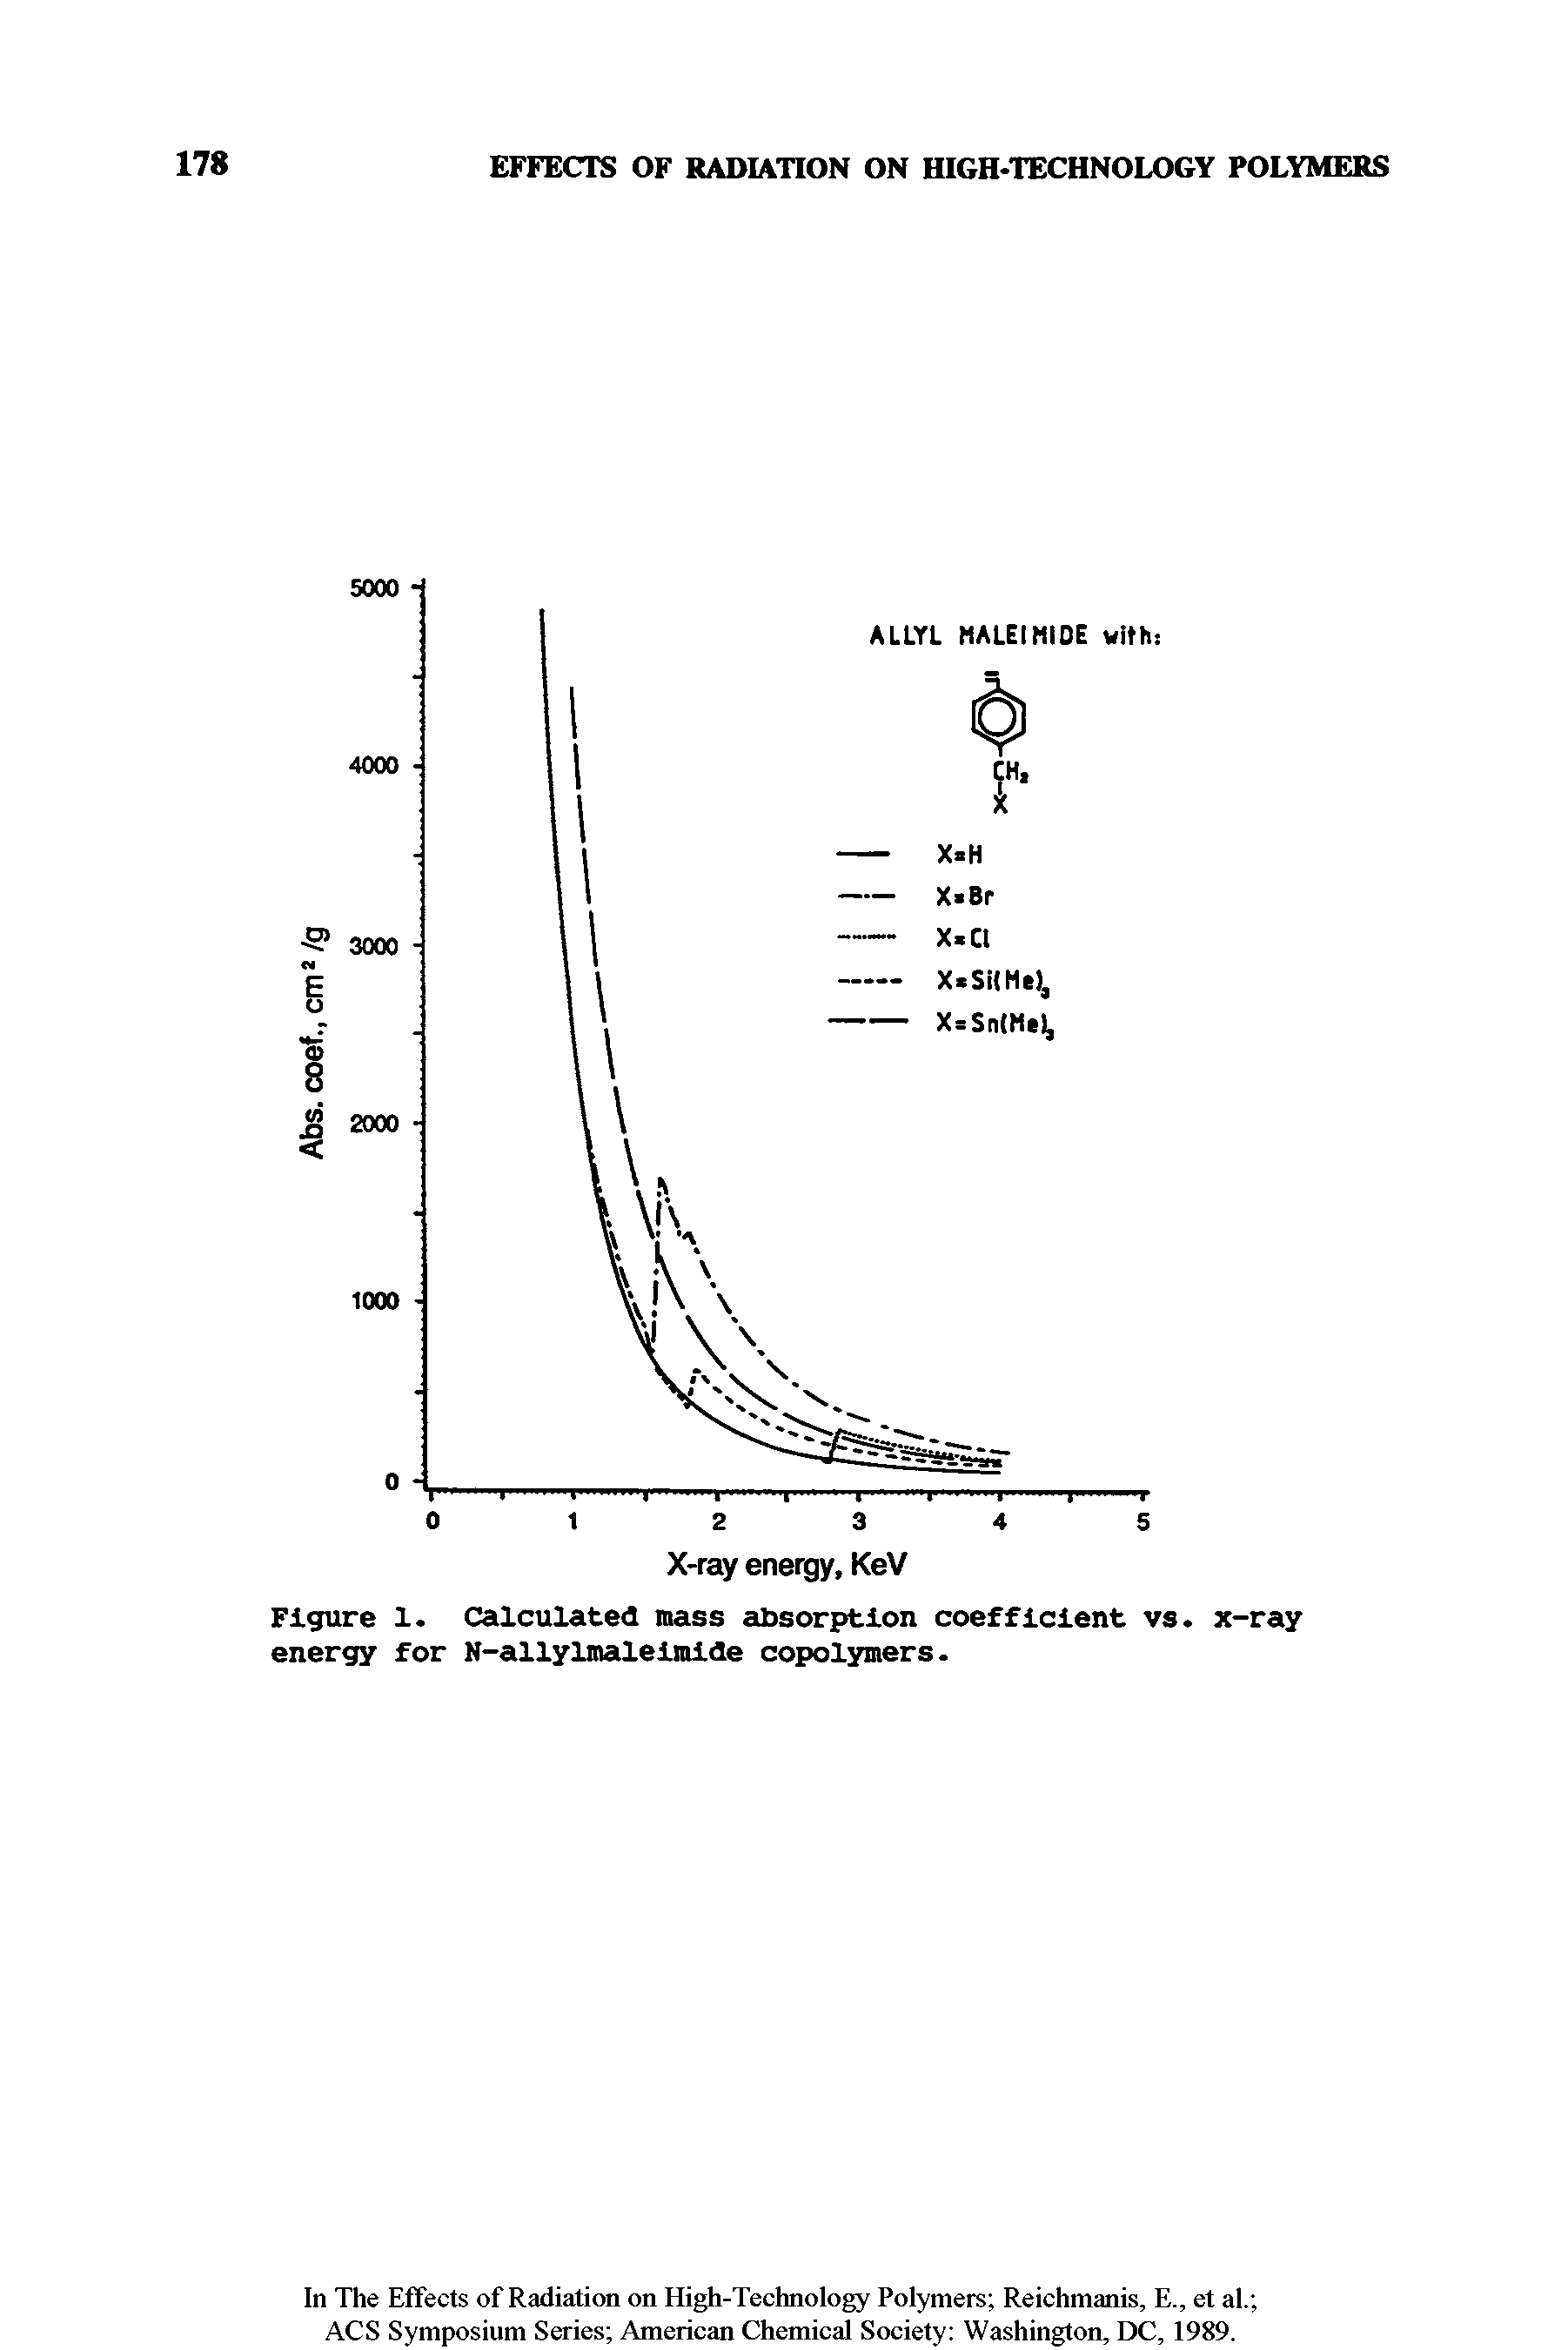 Figure 1. Calculated mass absorption coefficient vs. x-ray energy for N-allylmaleimide copolymers.